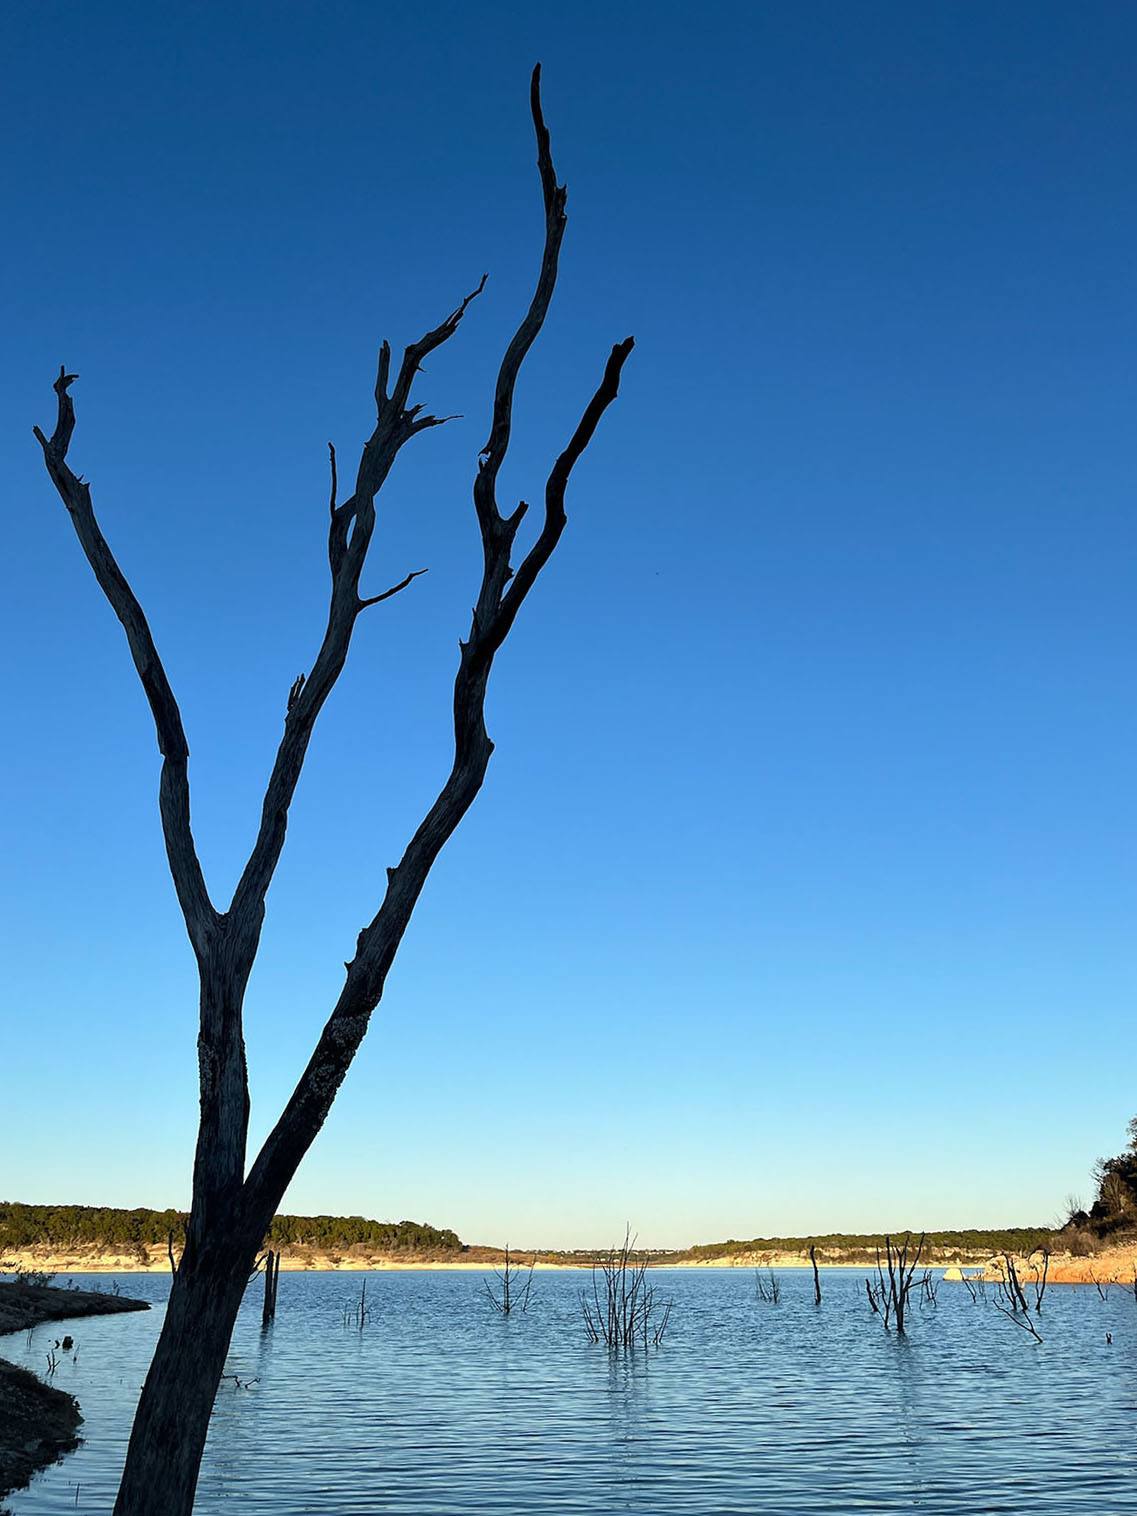 Dark leafless tree branches grow out of the water under a blue sky